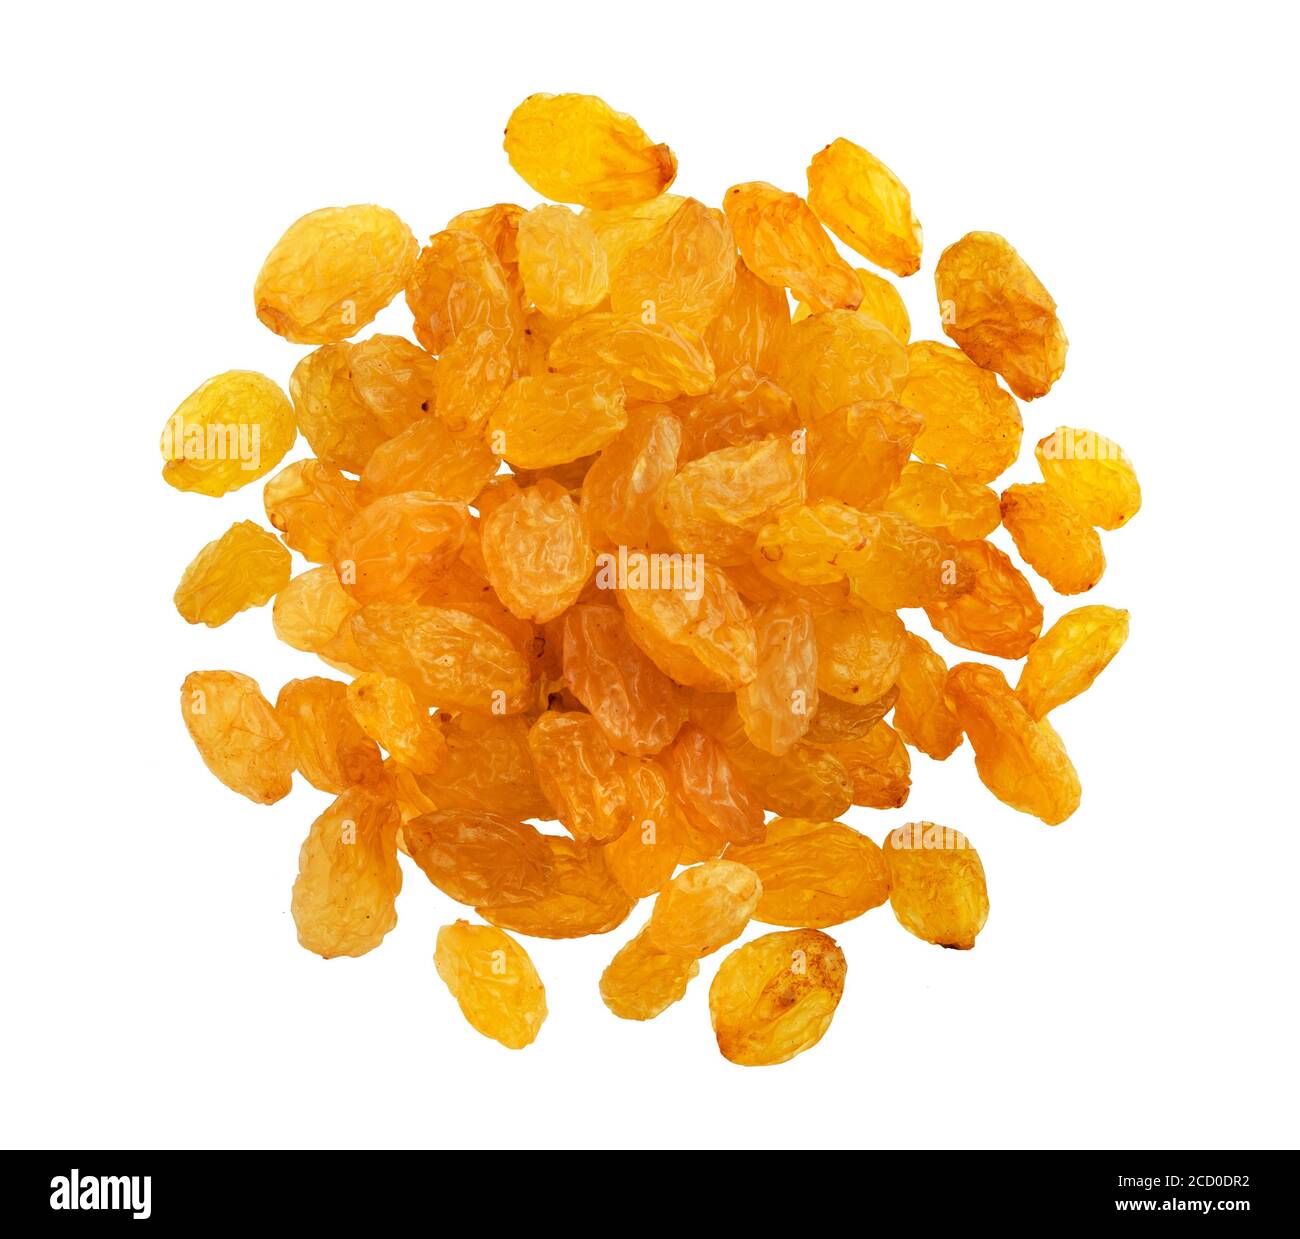 Top view of golden raisins isolated on white background Stock Photo